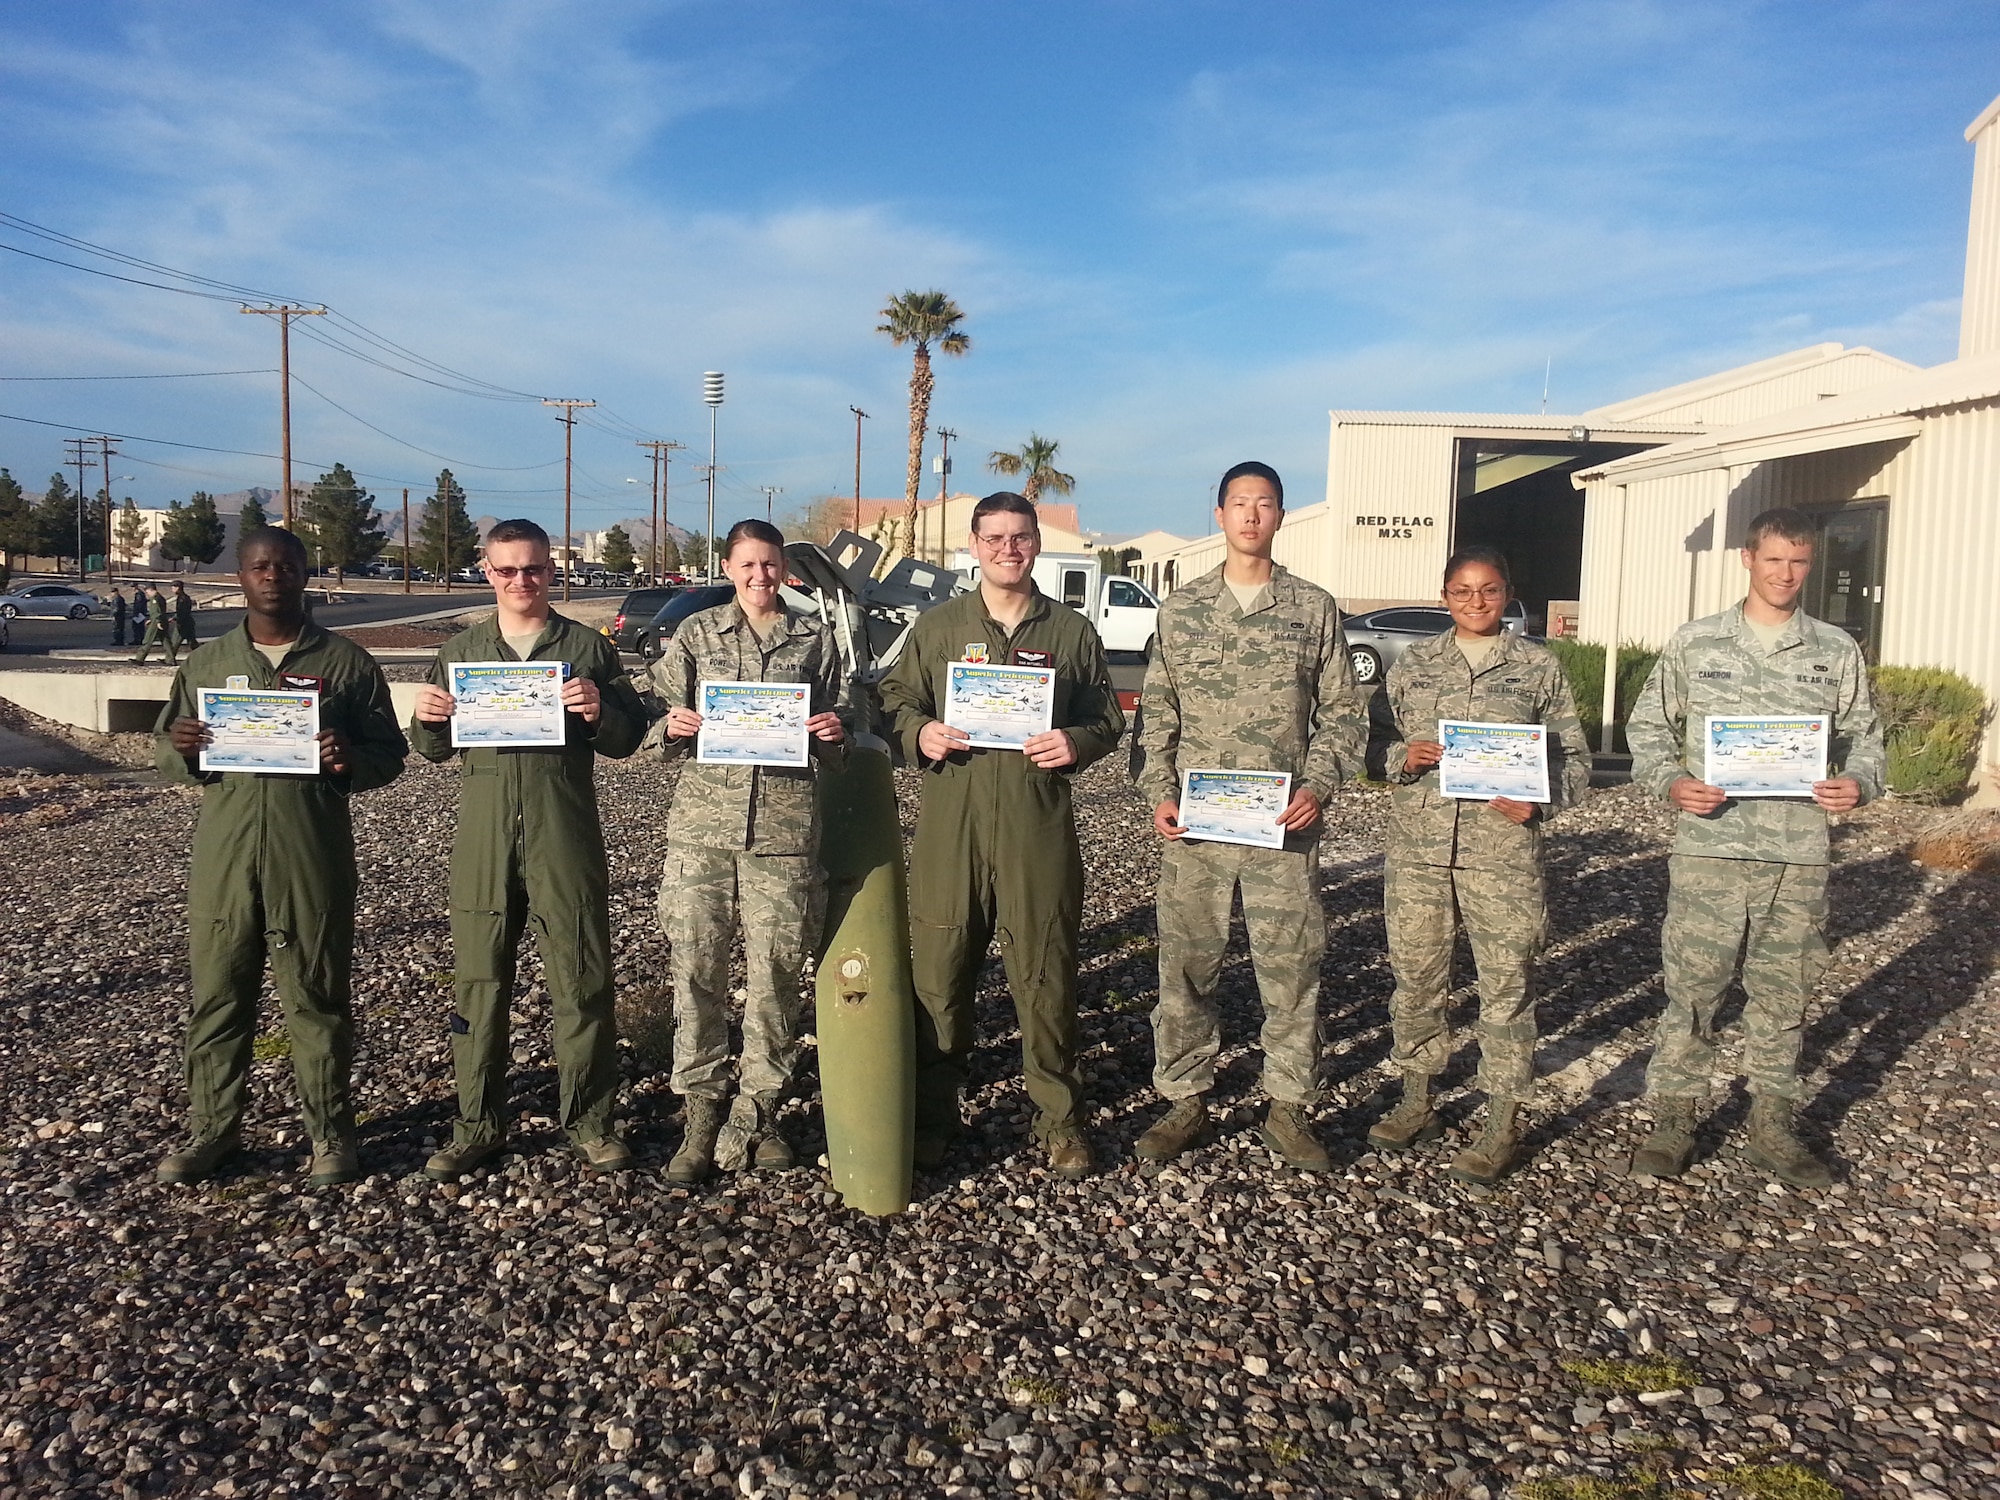 (From left) U.S. Air Force Senior Airman Tiderro Harmon, Staff Sgt Mark Cochrane, Senior Airman Bridget Rowe, 1st Lt. Daniel Mitchell, Senior Airman Timmon Reed, Airman 1st Class Diana Jiminez, and Senior Airman Joshua Cameron, all from the 55th Electronic Combat Group, stand with their certificates for superior performerance in the Red Flag 13-3 exercise. Along with Capt. Grant Kimmel and Staff Sgt Zachary Meyers, also from the 55th ECG, these Airmen were recognized out of 94 members from the 55th ECG who participated in Red Flag 13-3. (Courtesy photo/Released)